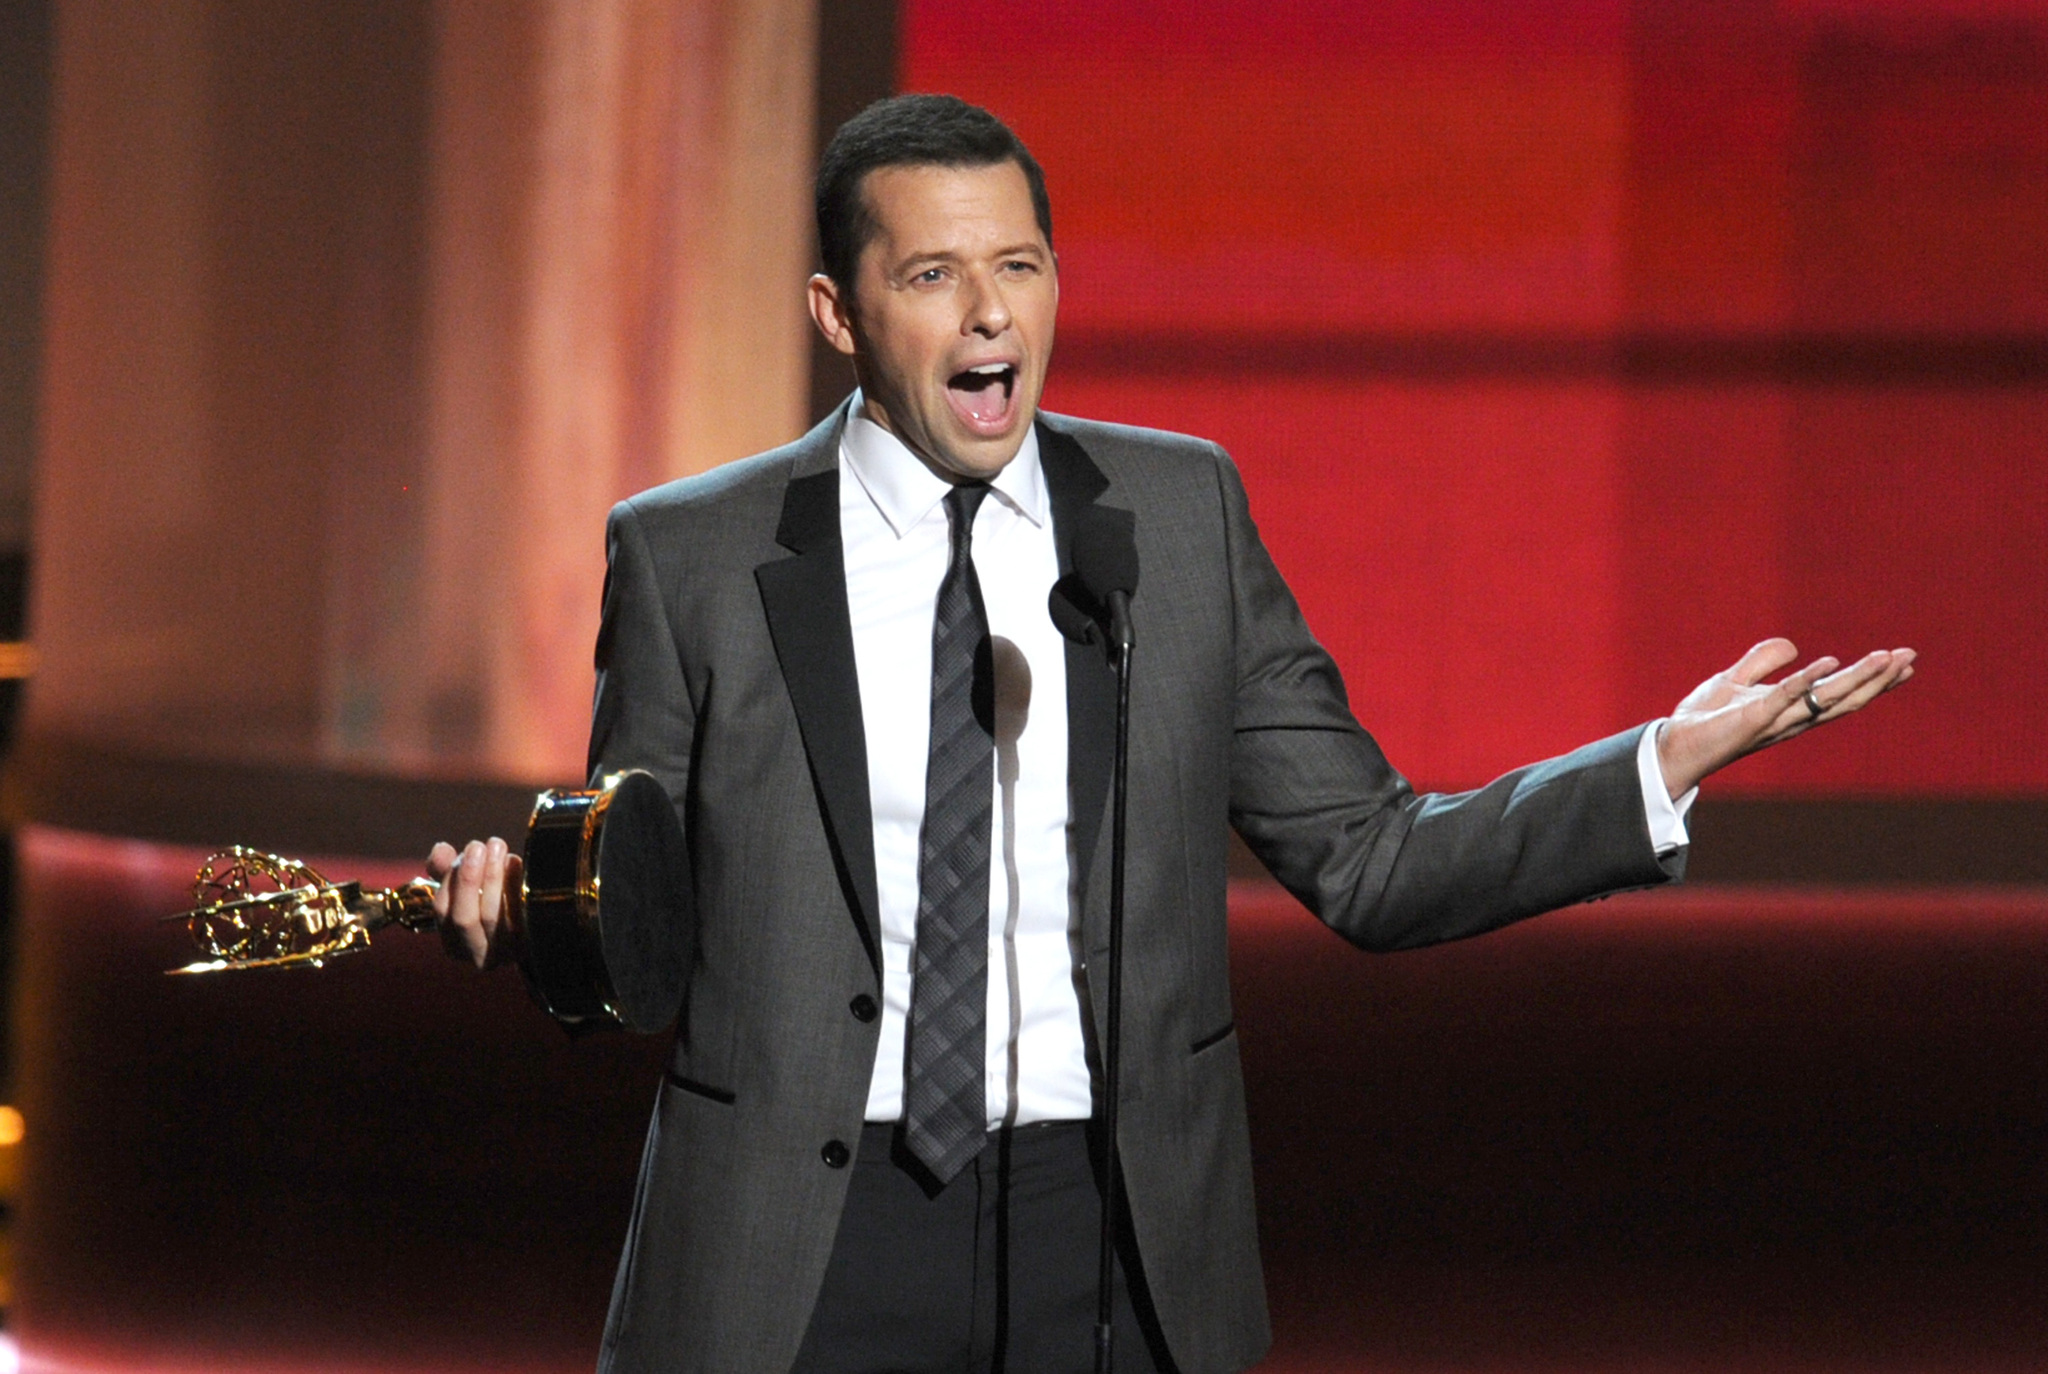 Jon Cryer at event of The 64th Primetime Emmy Awards (2012)